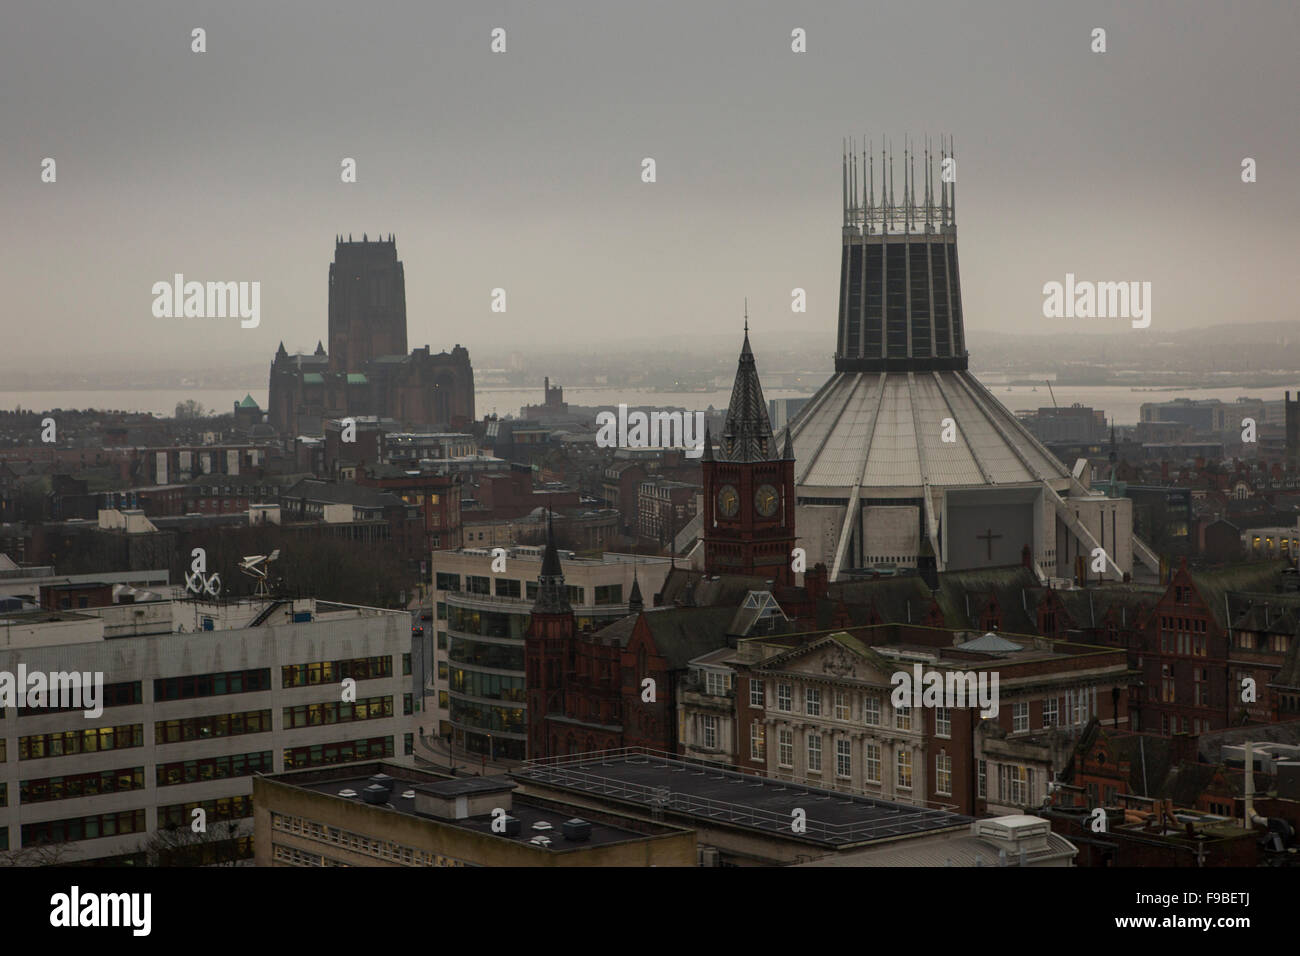 Liverpool skyline on a grey day including Liverpool Metropolitan Cathedral (front right) and Liverpool Cathedral (back left) Stock Photo